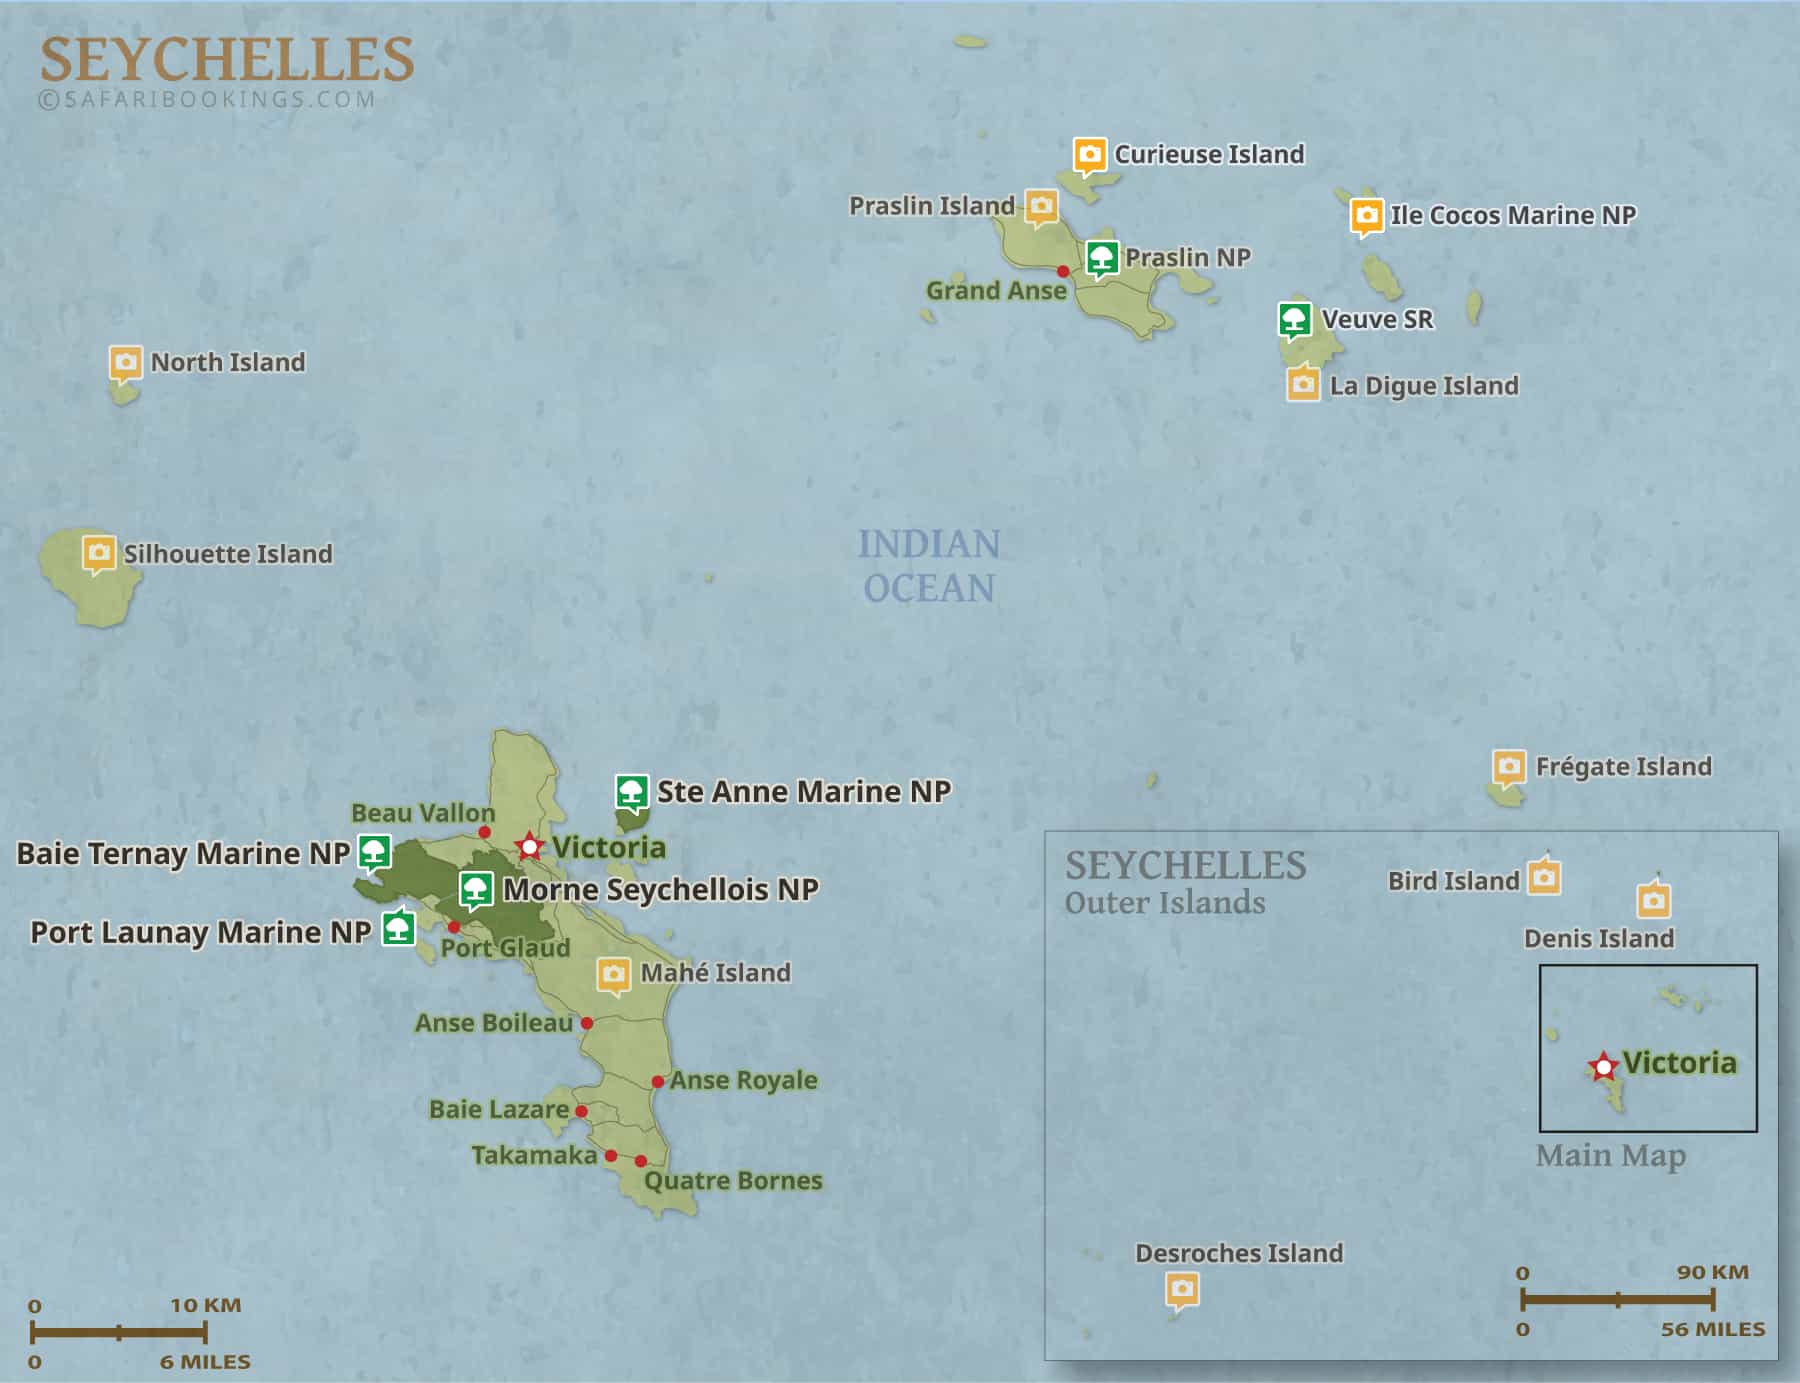 Popular Routes in Seychelles